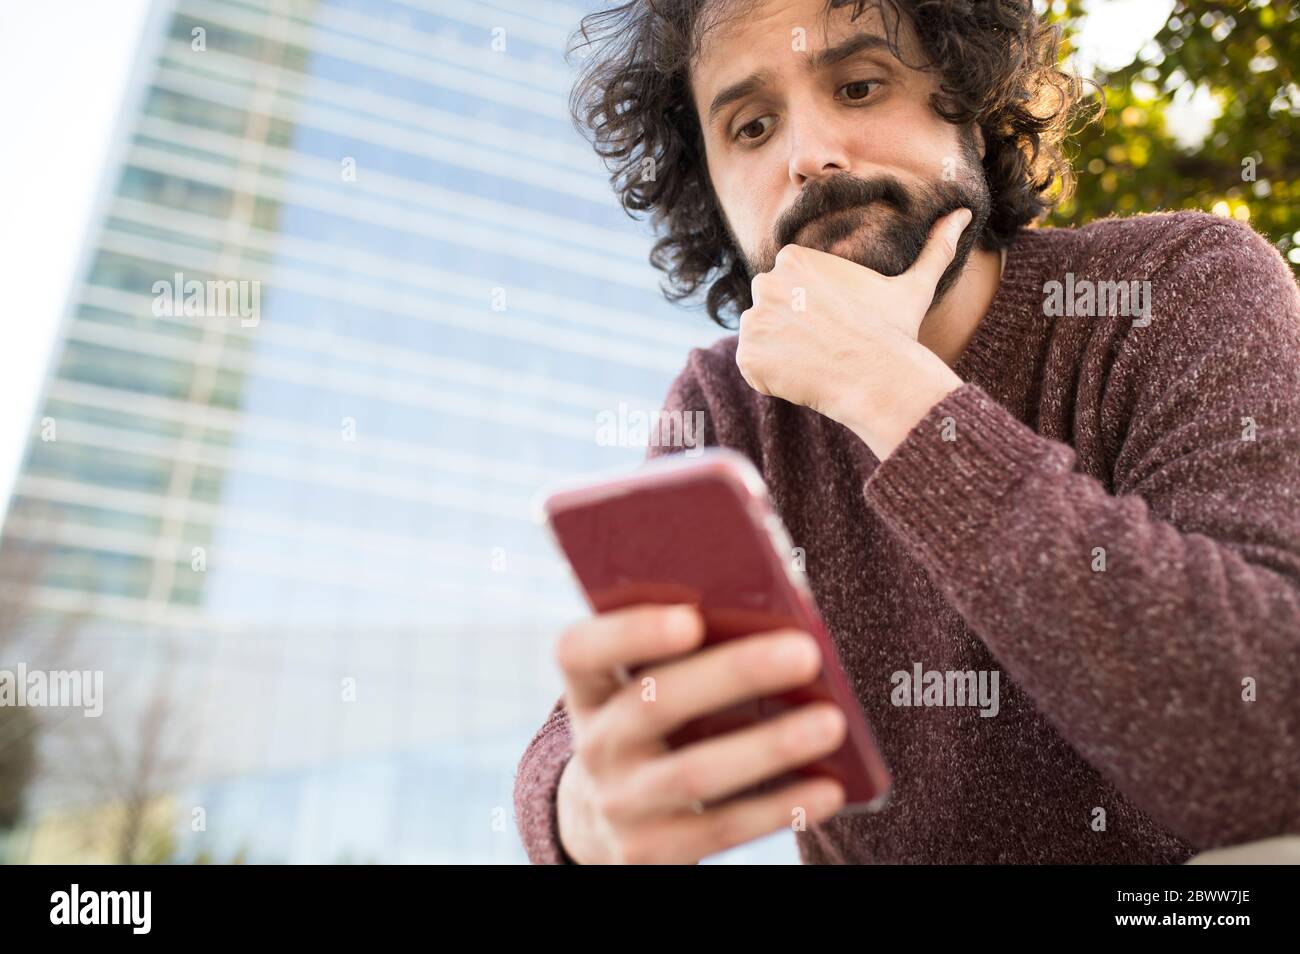 Portrait of bearded man looking at smartphone outdoors Stock Photo